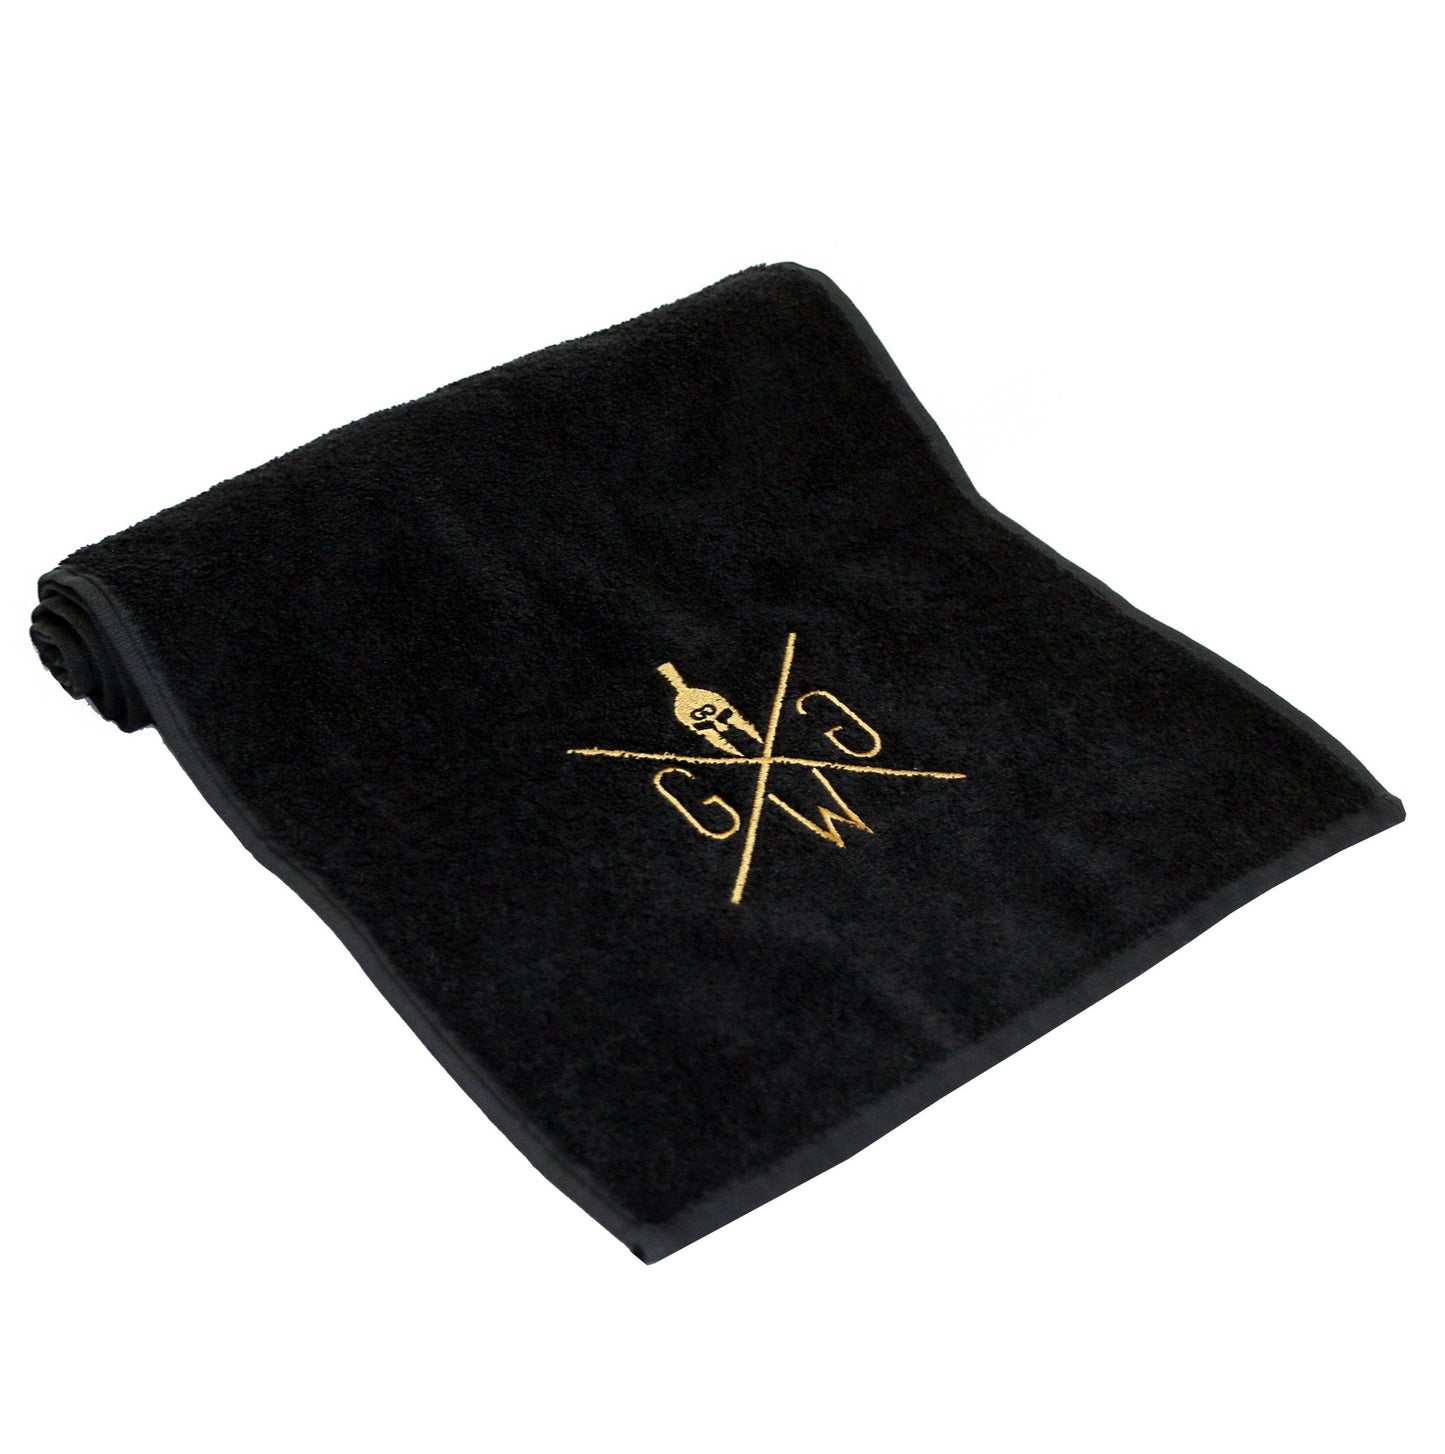 Sports Towel - Gold Embroidery - Gym Generation-